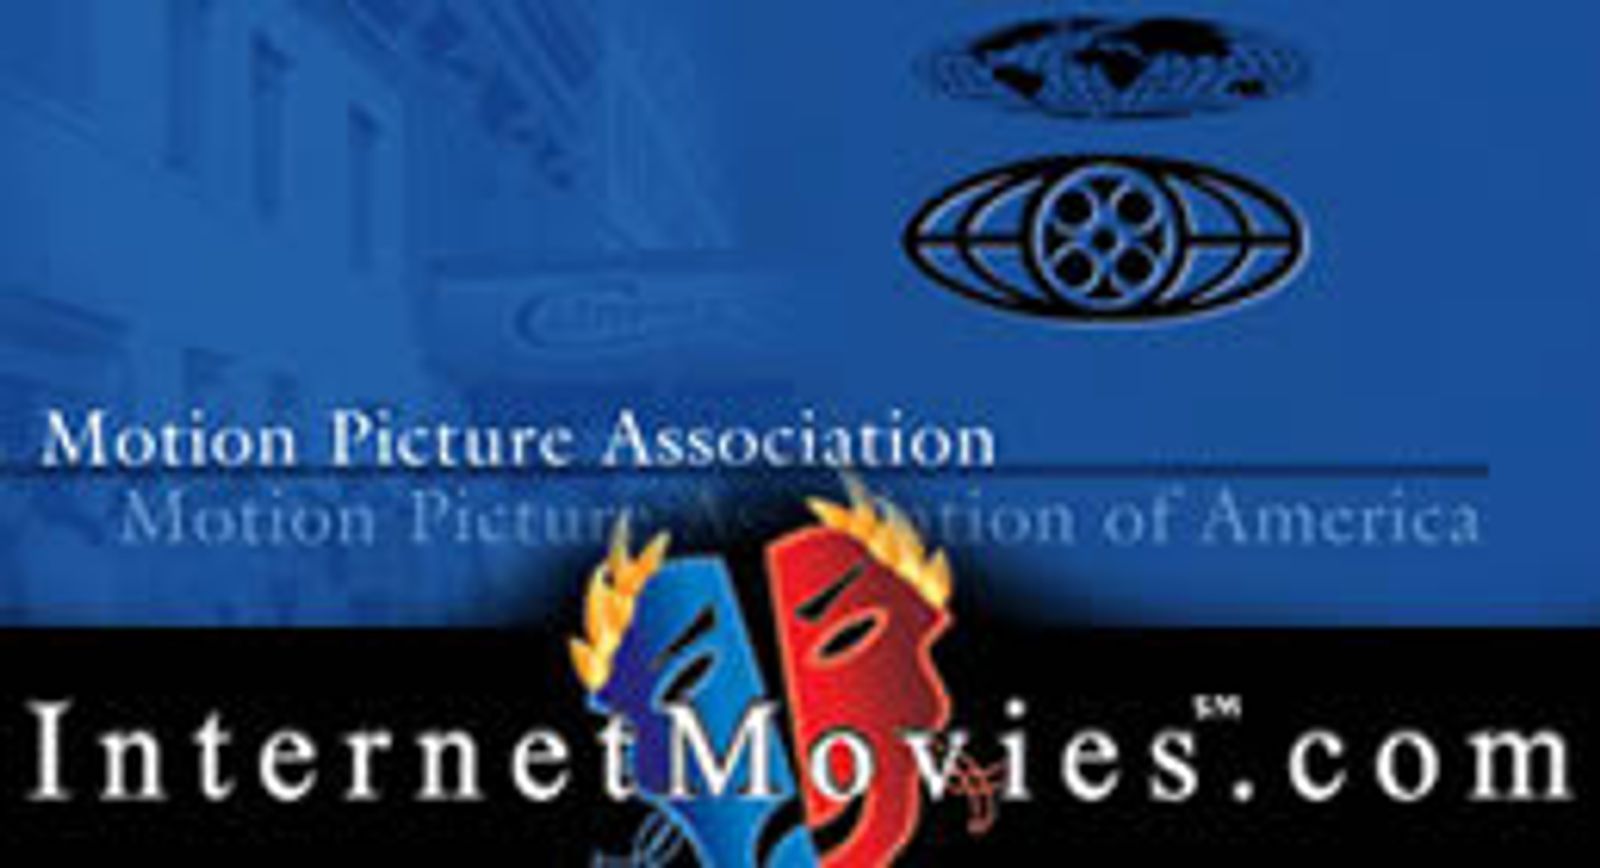 MPAA Can Shut InternetMovies.com Without Infringement Proof: Court